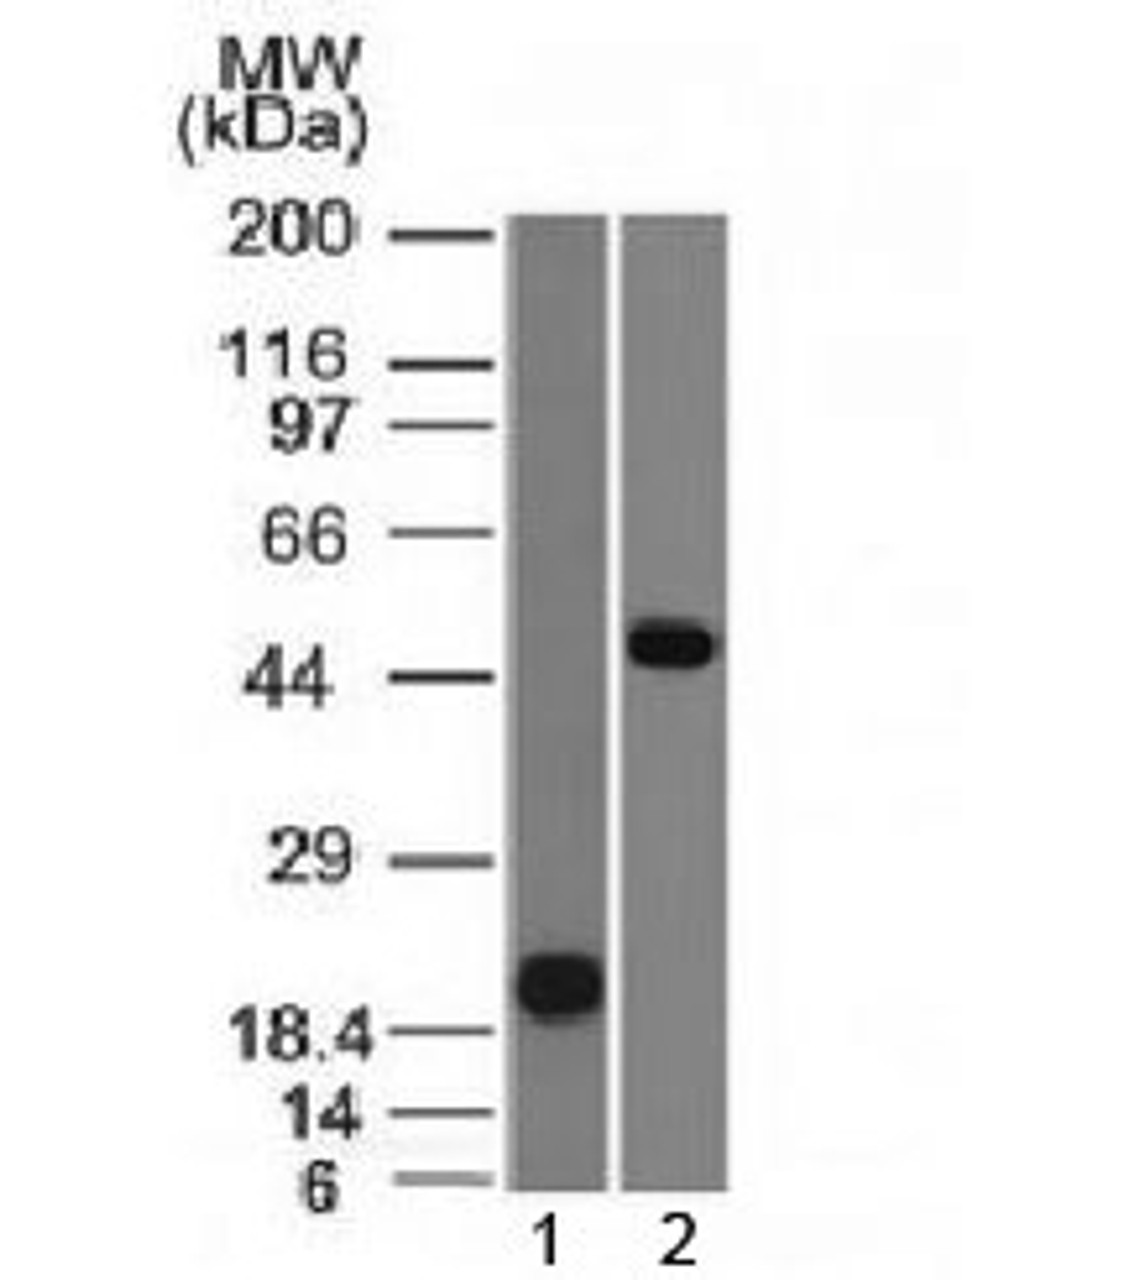 Western blot testing of 1) human partial recombinant protein and 2) human Raji cell lysate with PAX-8 antibody (clone PAX8/1491) . Predicted molecular weight of isoforms 1-5: 31, 35, 42, 43 and 48 kDa, respectively. PAX-8 can also be observed at ~62 kDa.